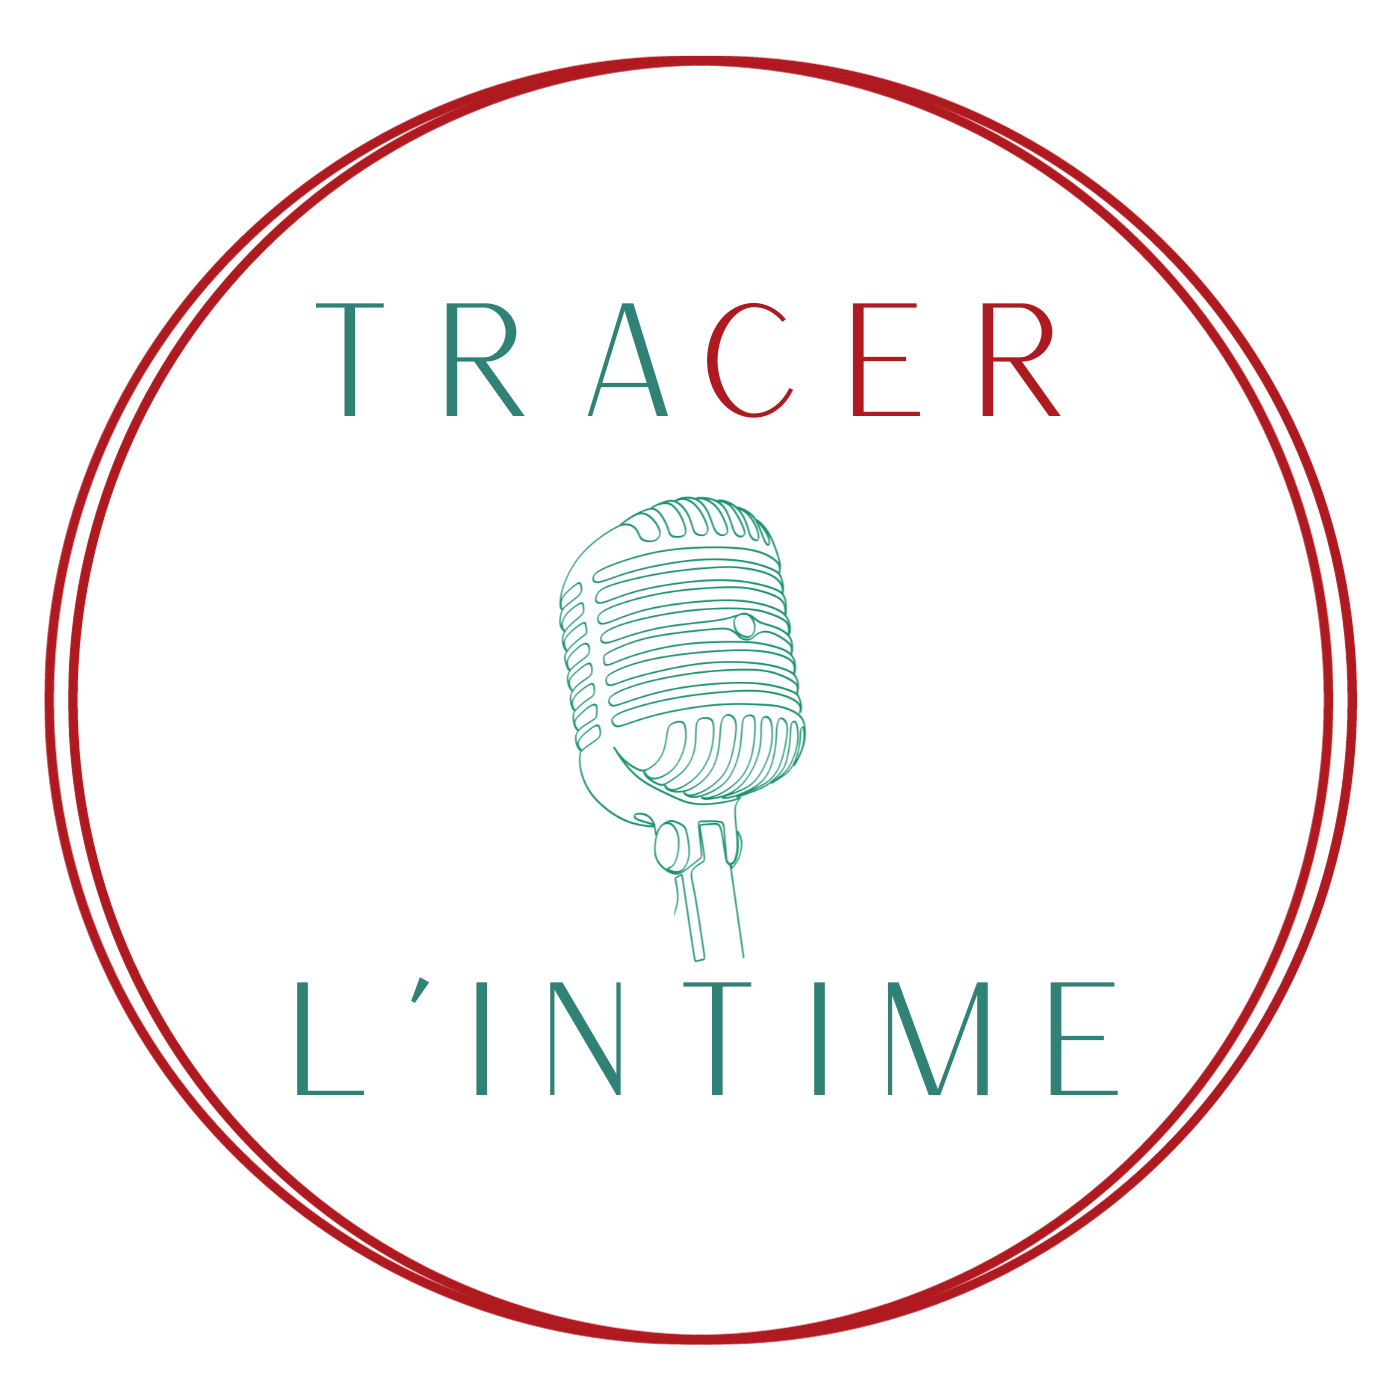 Tracer lintime 1400 x 1400 px 2